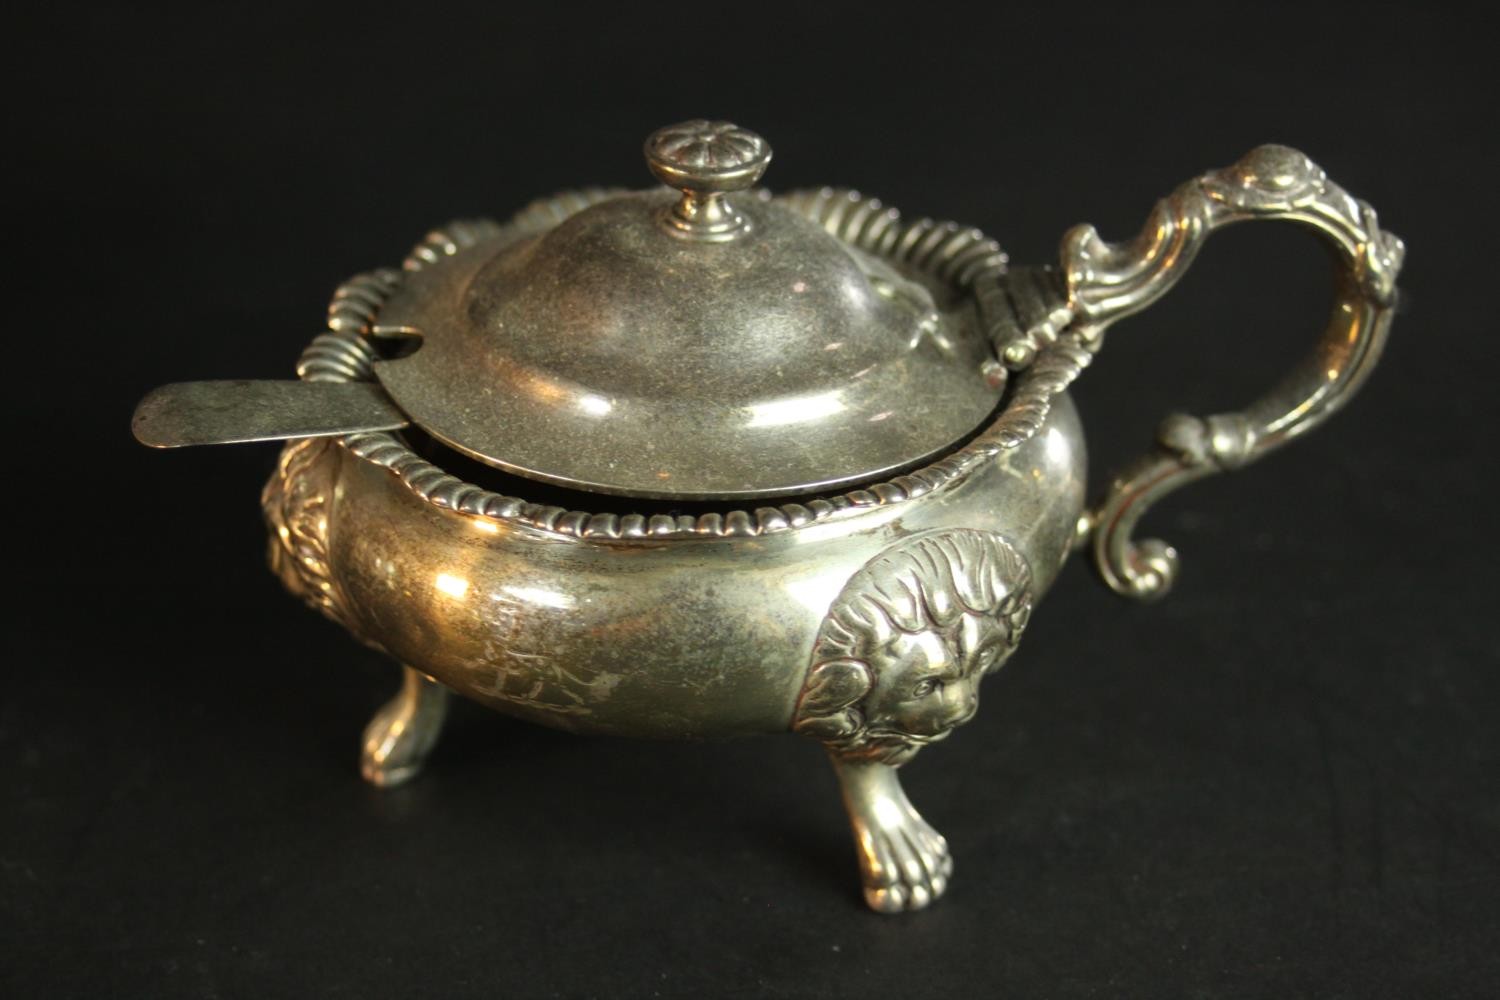 Six 19th and 20th century sterling silver hinged lid mustard pots, various designs, makers and assay - Image 3 of 15